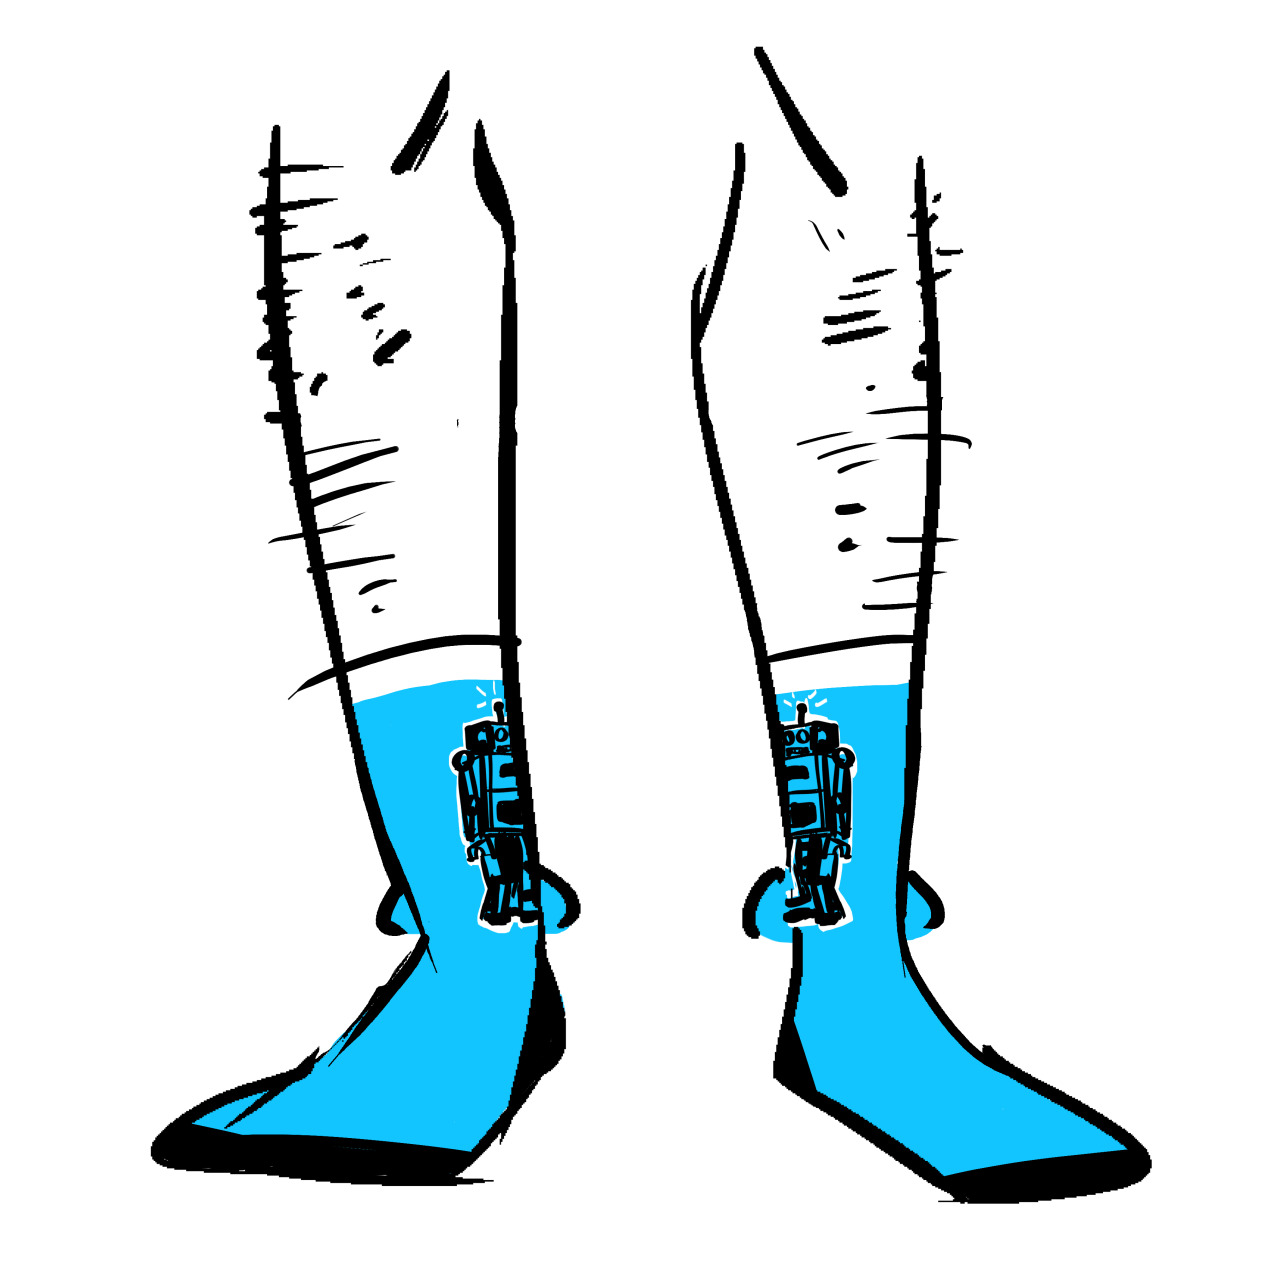 Blue socks with black outlines of wind-up robots on them,